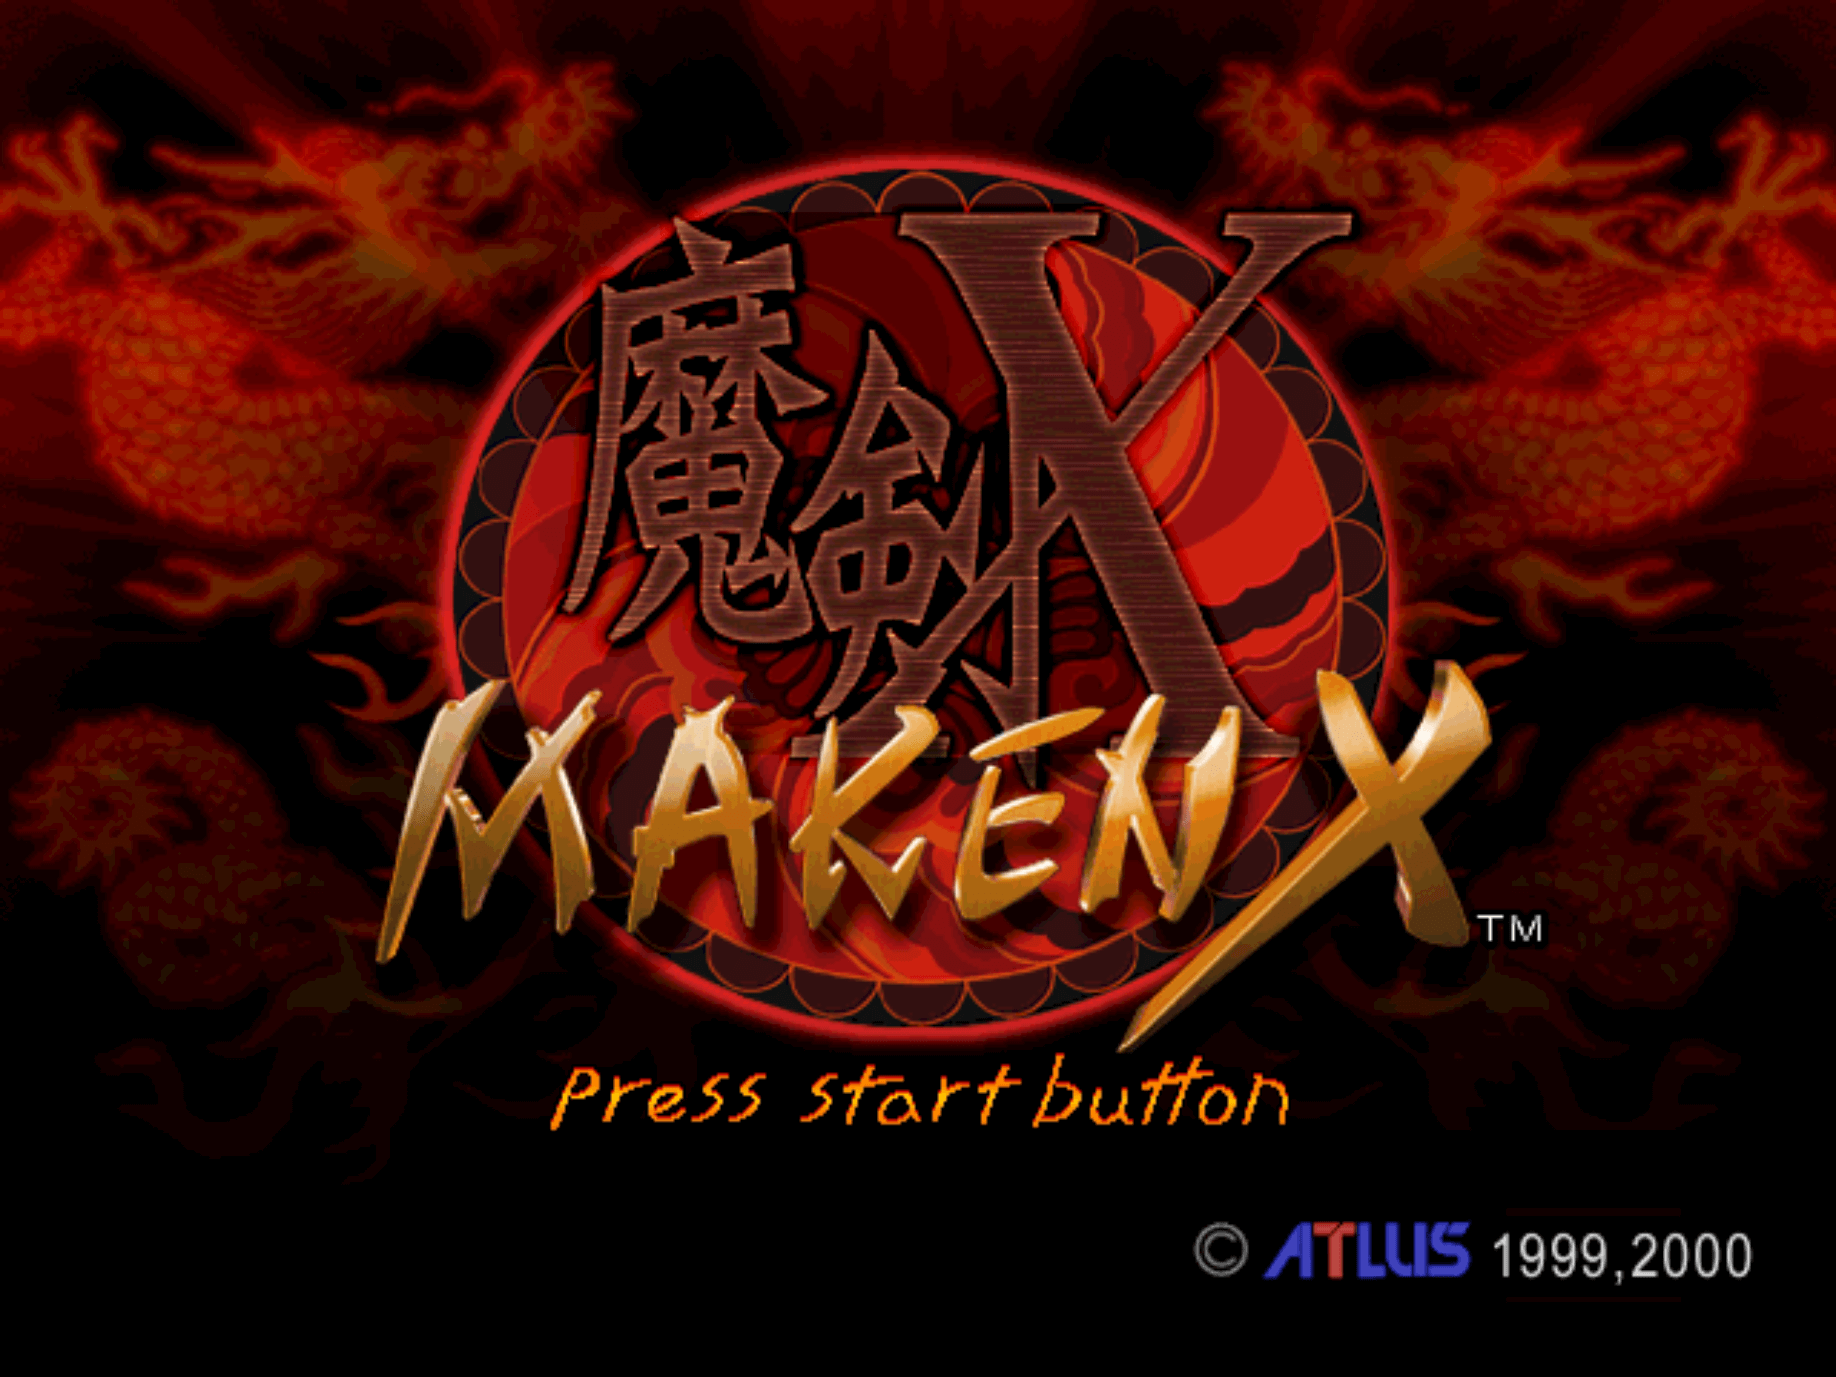 A screenshot of the title screen of the game Maken X.